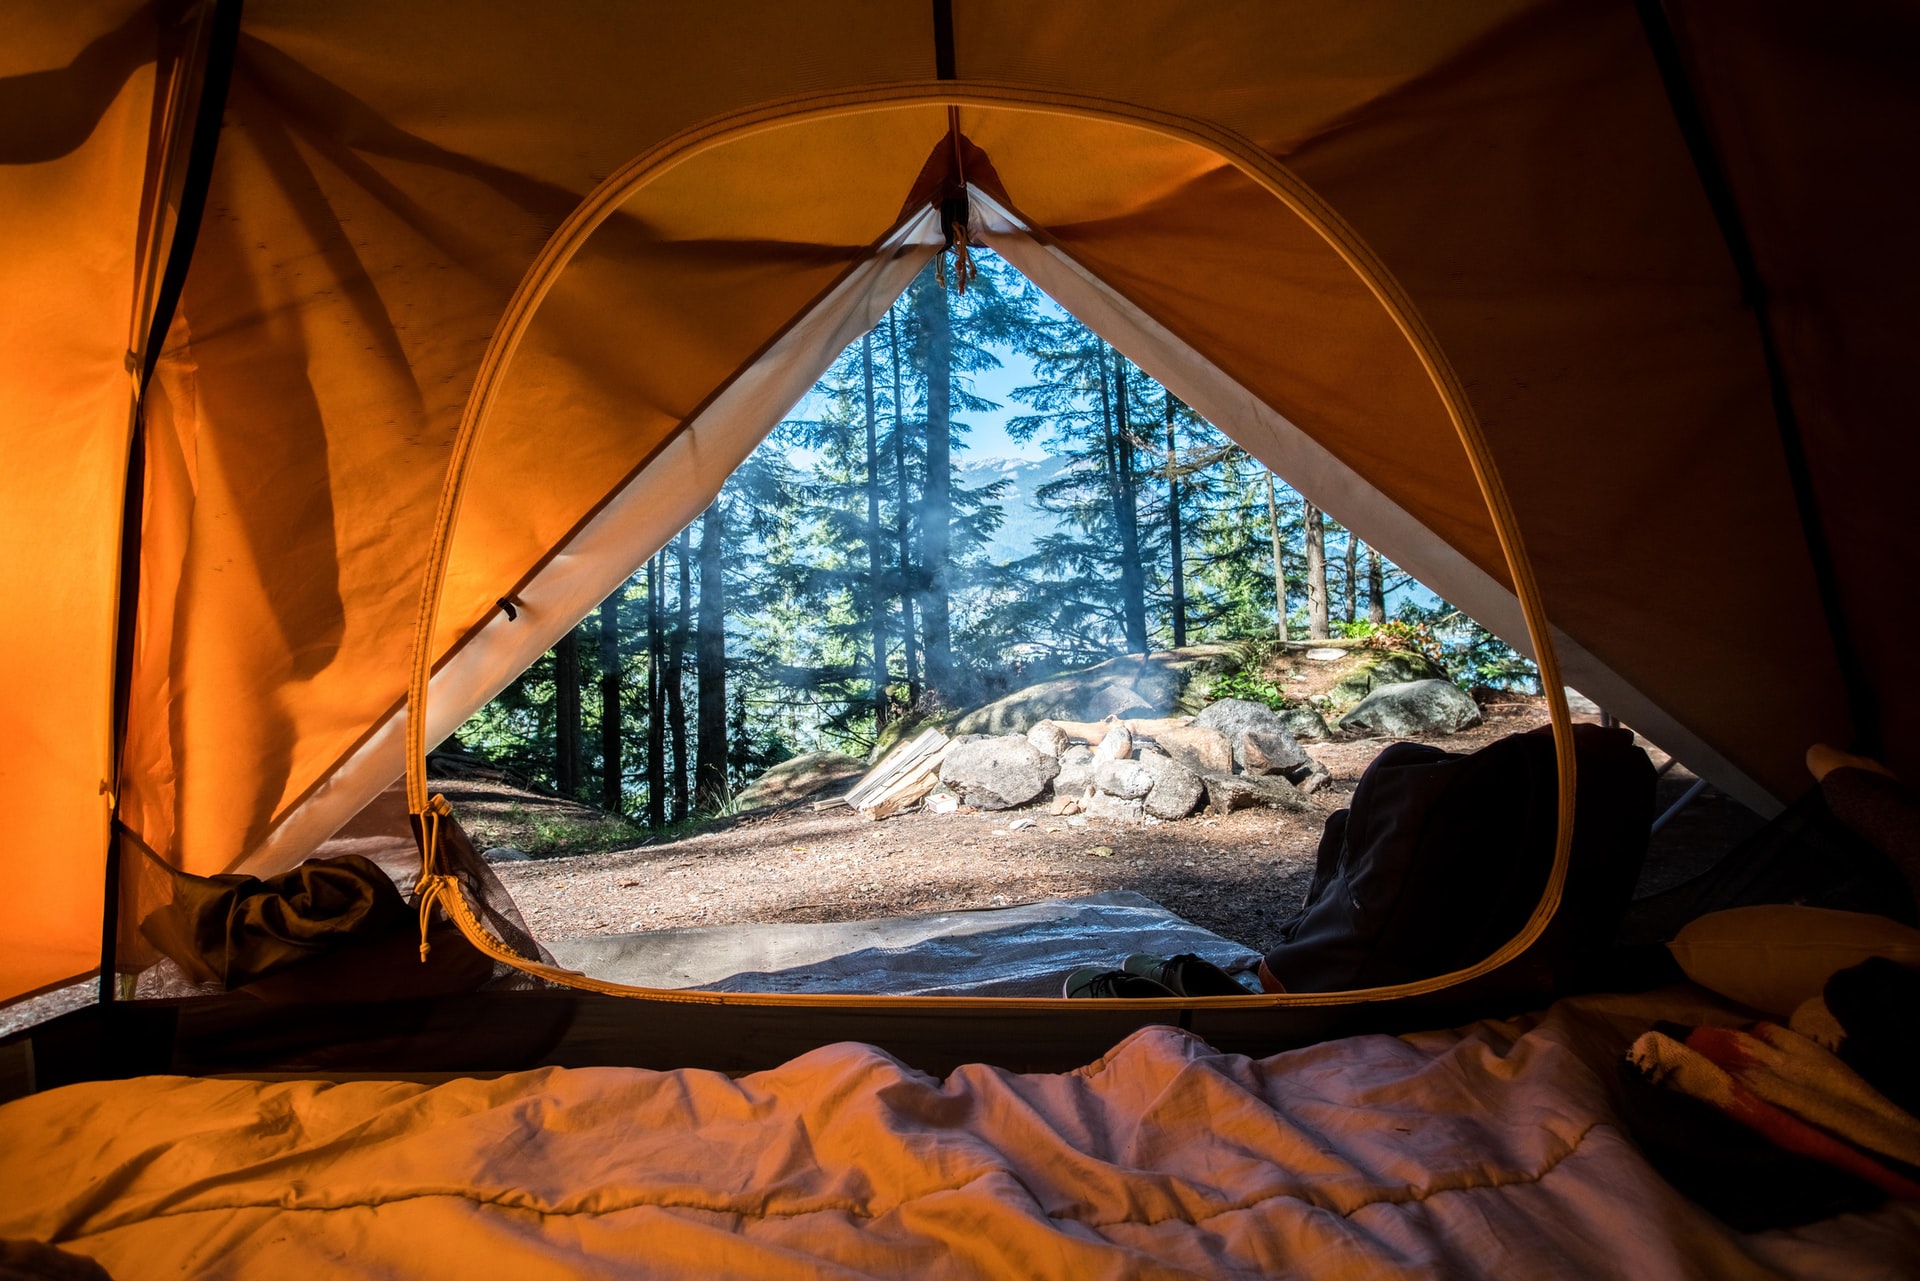 Inside a tent representing safety issues when camping